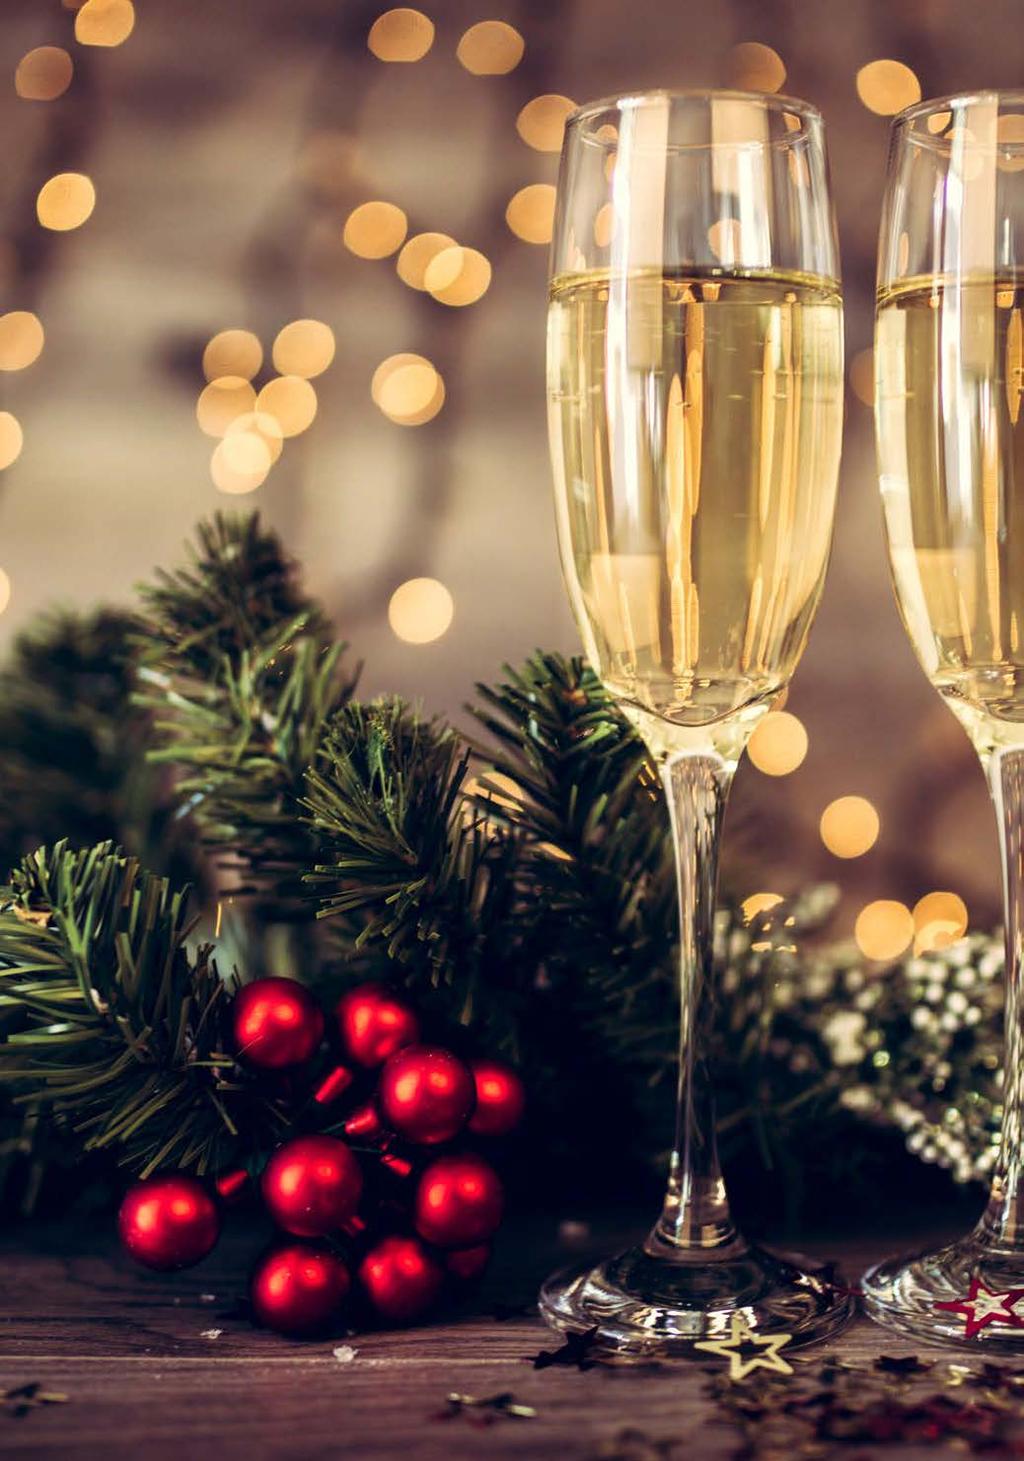 FESTIVE DRINKS BEER PACKAGE 25 6 Specially Selected Bottled Lagers WINE PACKAGE 50 Select 3 Bottles Of House White, Red Or Rose CHAMPAGNE PACKAGE 99 2 Bottles Of Moet & Chandon MENU CALENDAR DATE 2